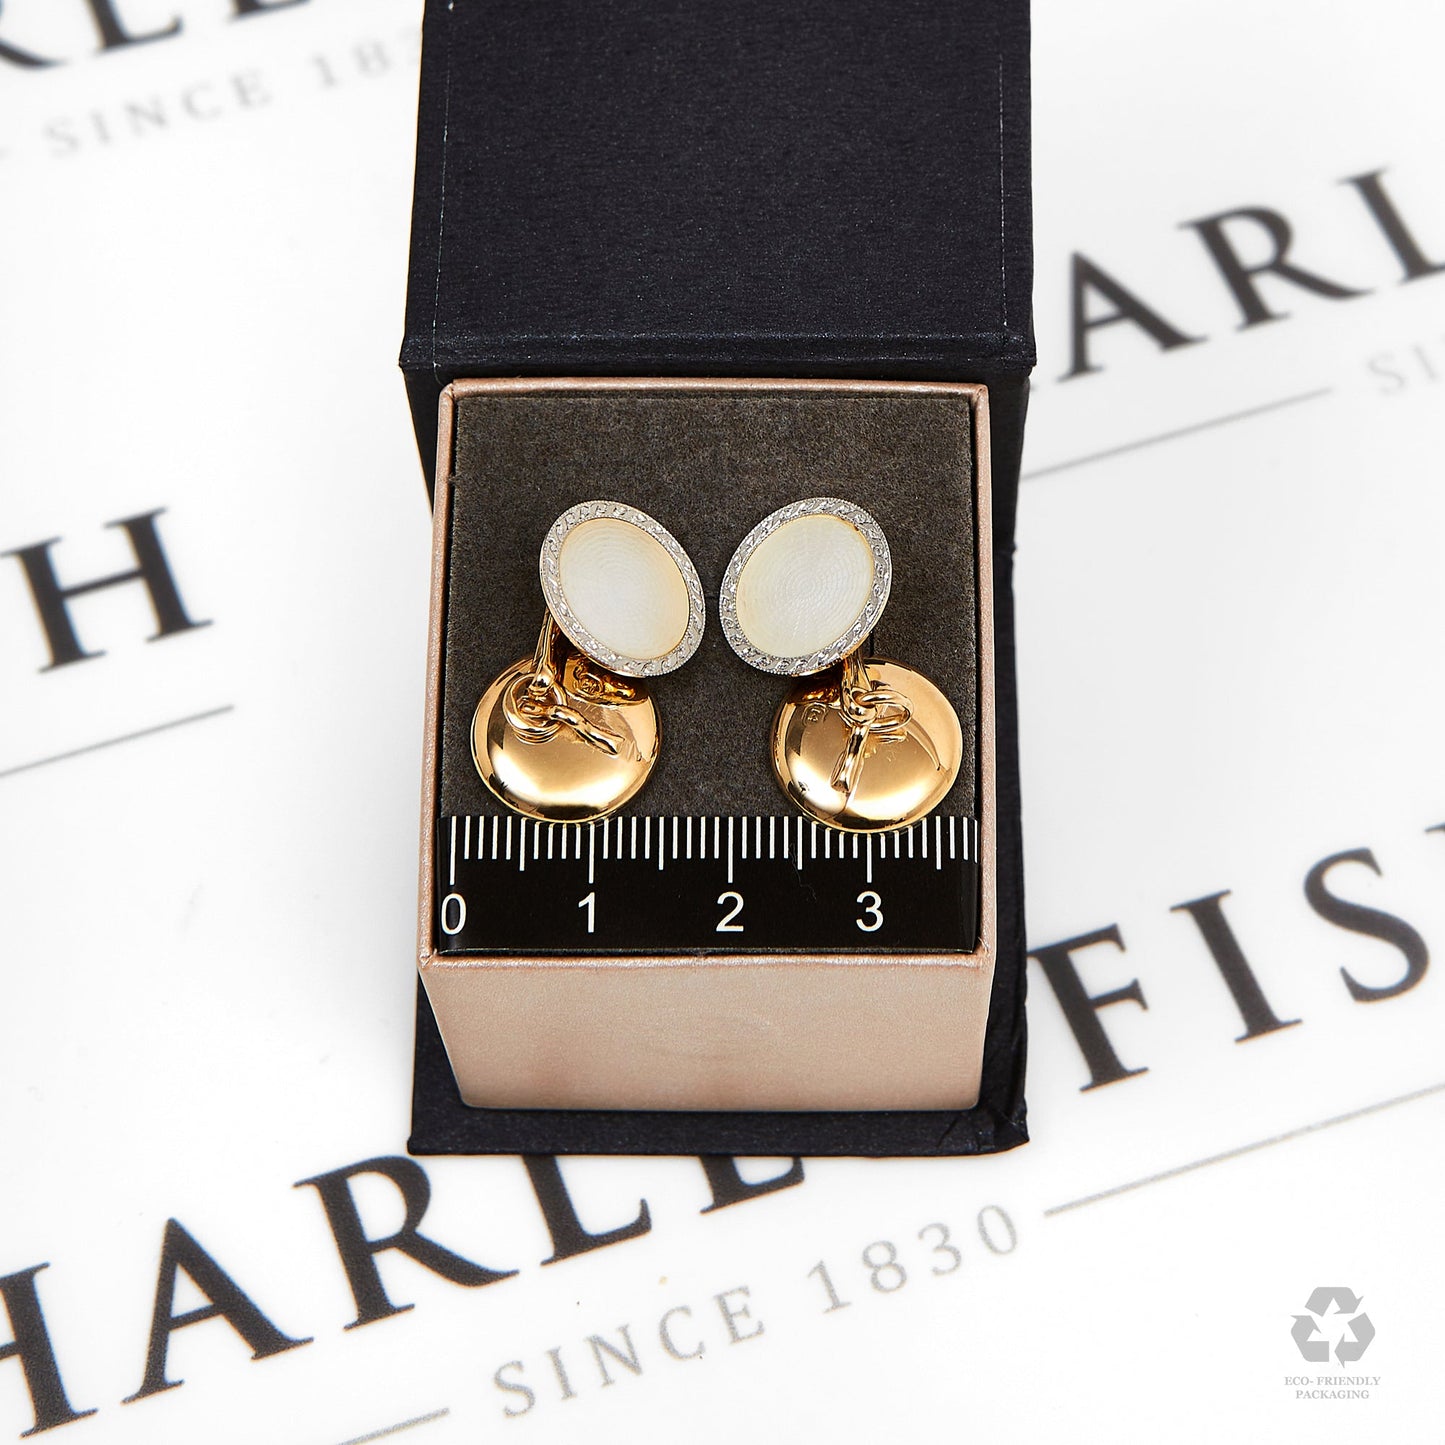 Pre-Owned 14ct Gold Round Mother Of Pearl Cufflinks